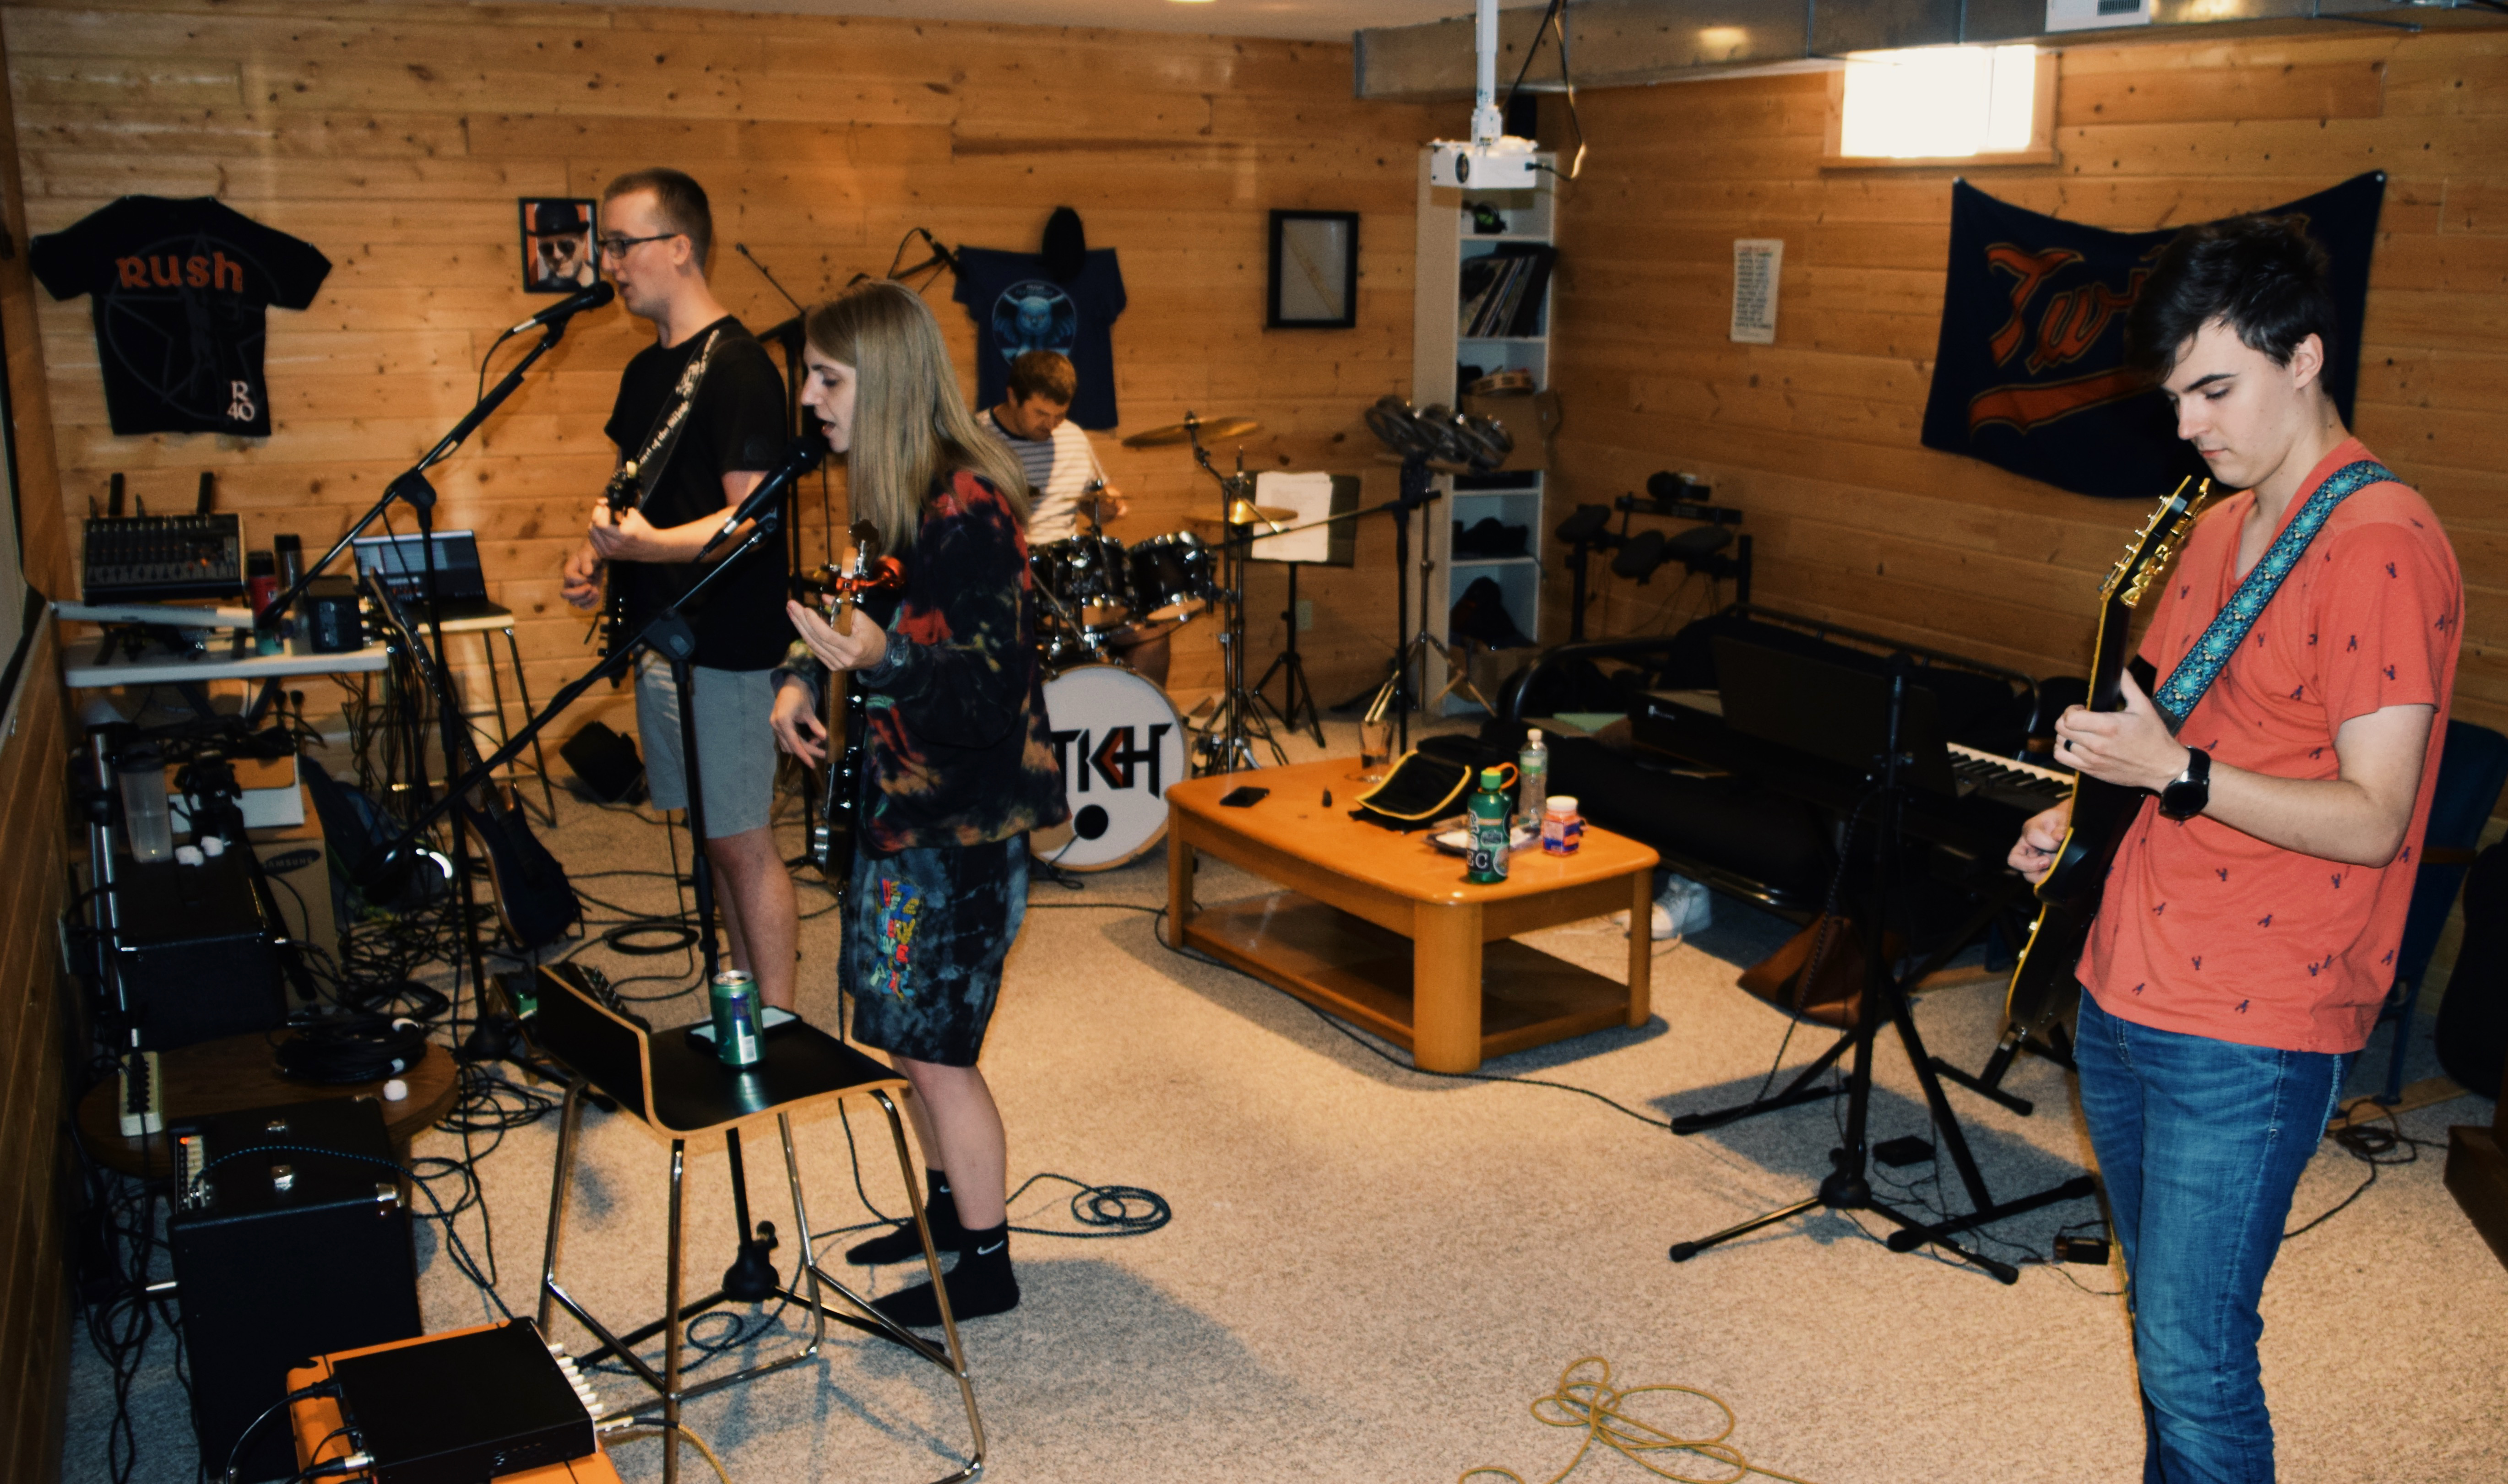 Wide shot of the rehearsal space